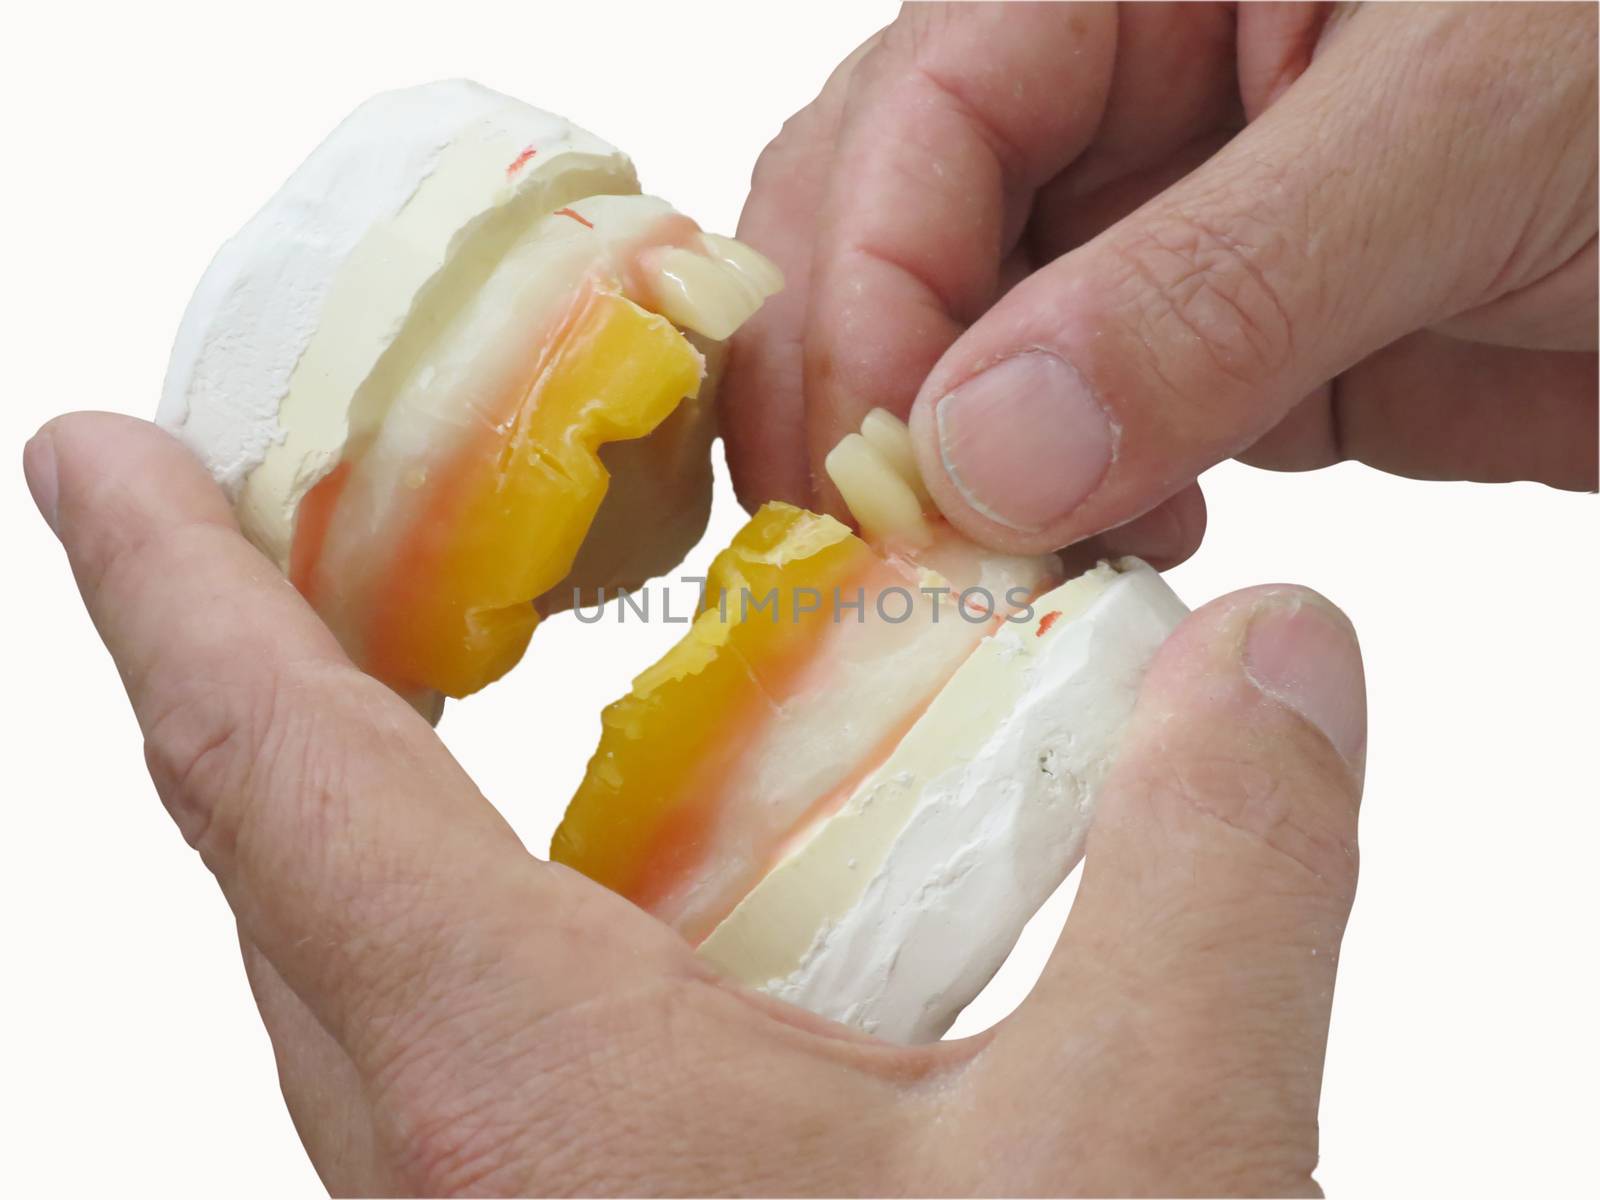 specialized hands that shape a plaster denture